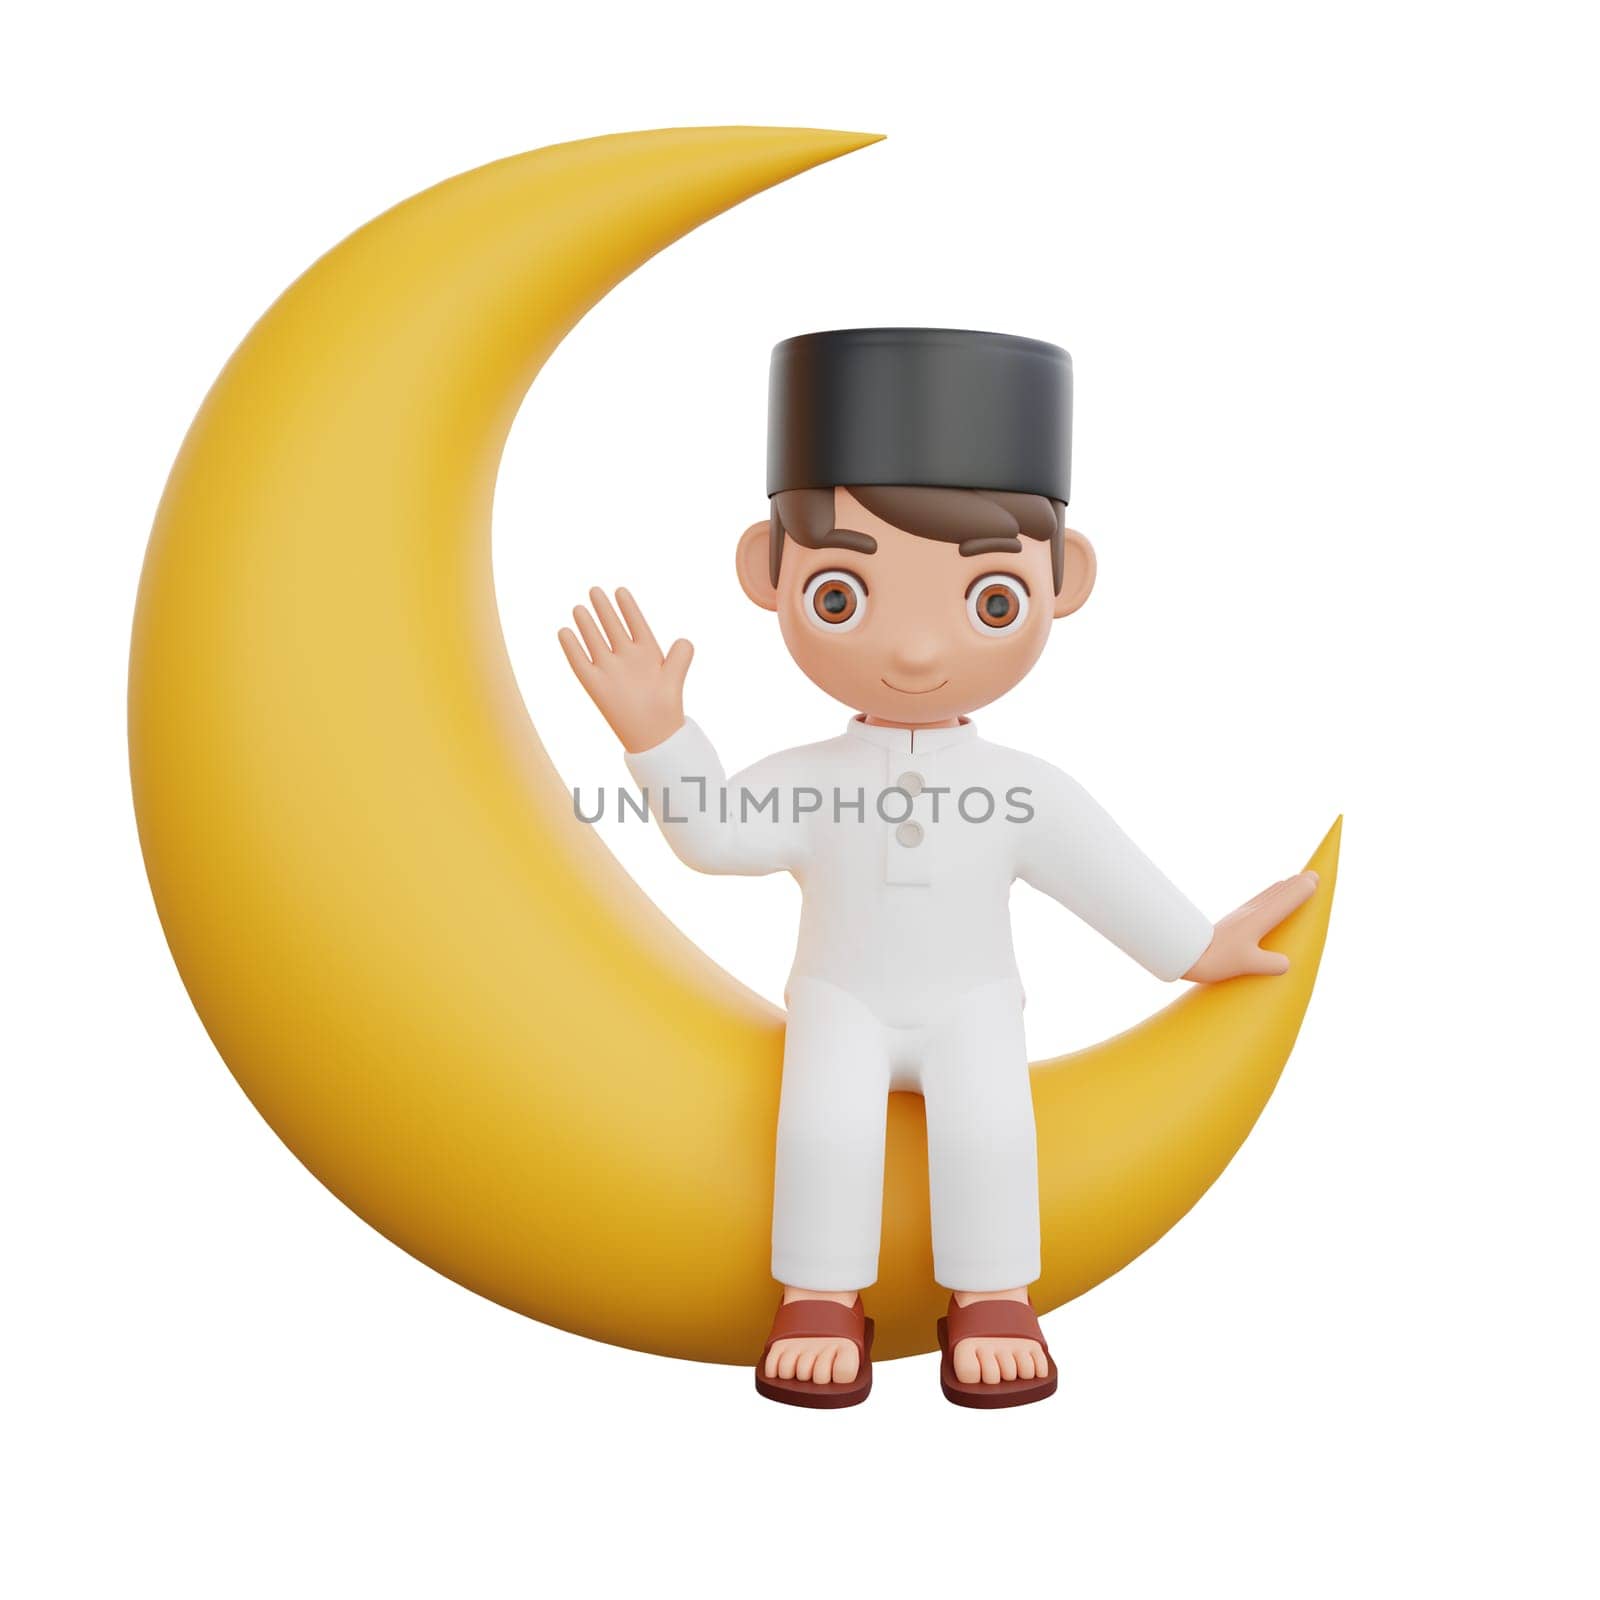 3D Illustration of Muslim character waving hand while sitting on a crescent moon by Rahmat_Djayusman